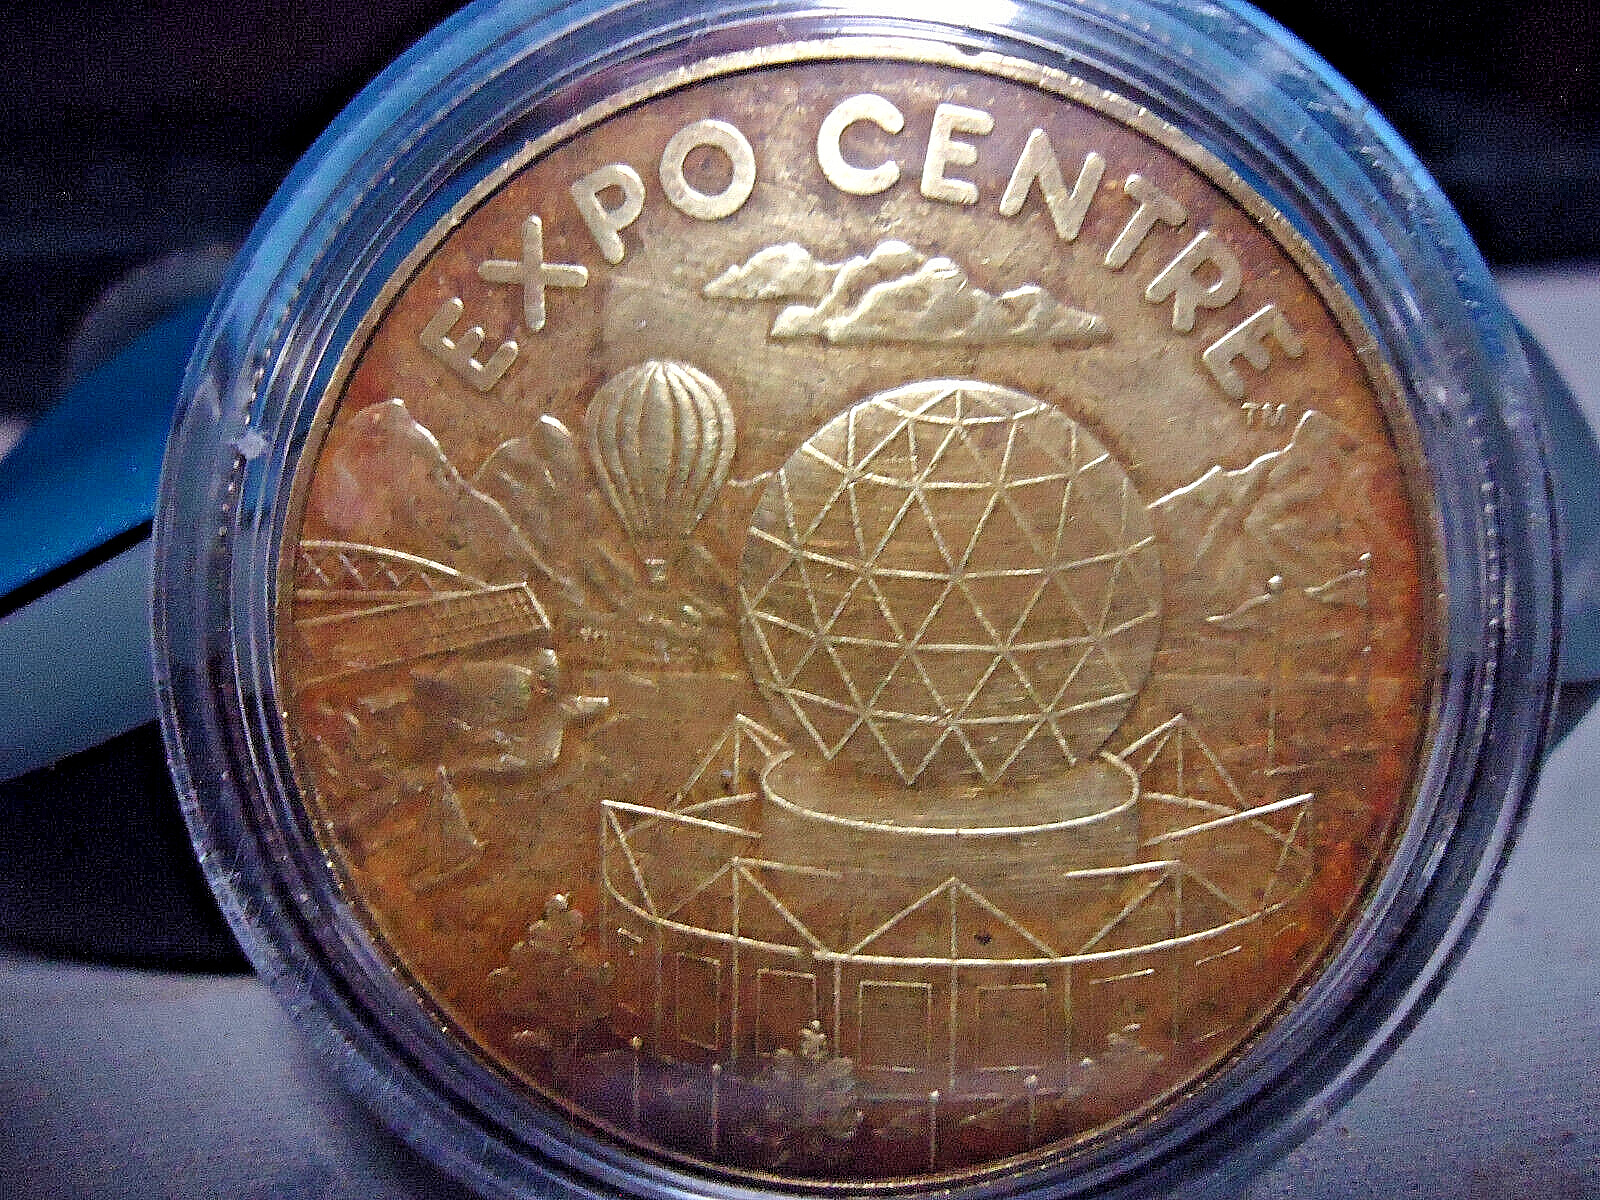 1986 VANCOUVER BC-EXPO CENTRE,WORLD EXPOSITION - Medallion in air tight holder